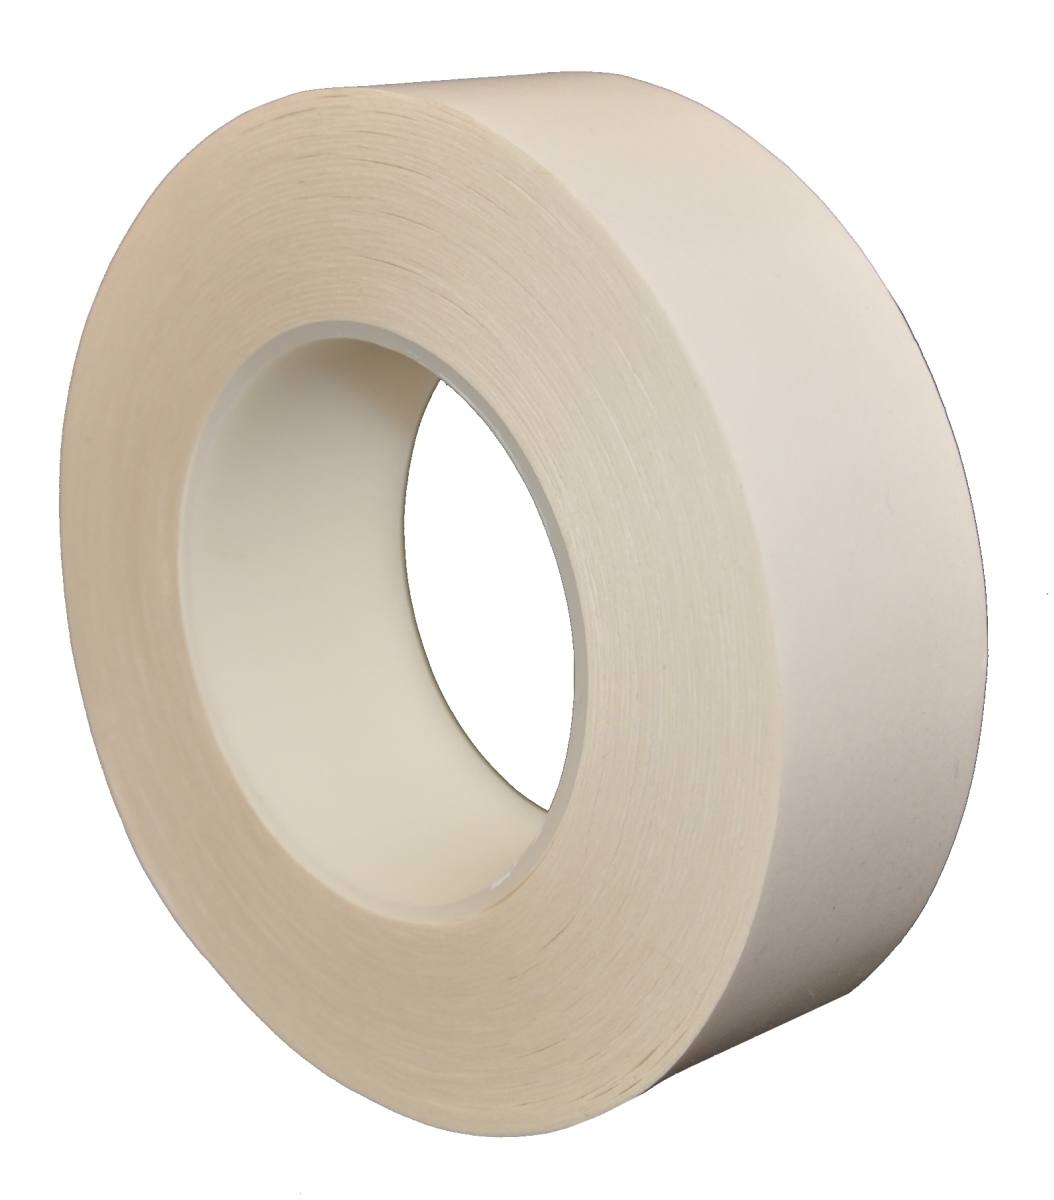 SKS silicone paper release liner, 500mmx150m, coated with glassine on both sides, white